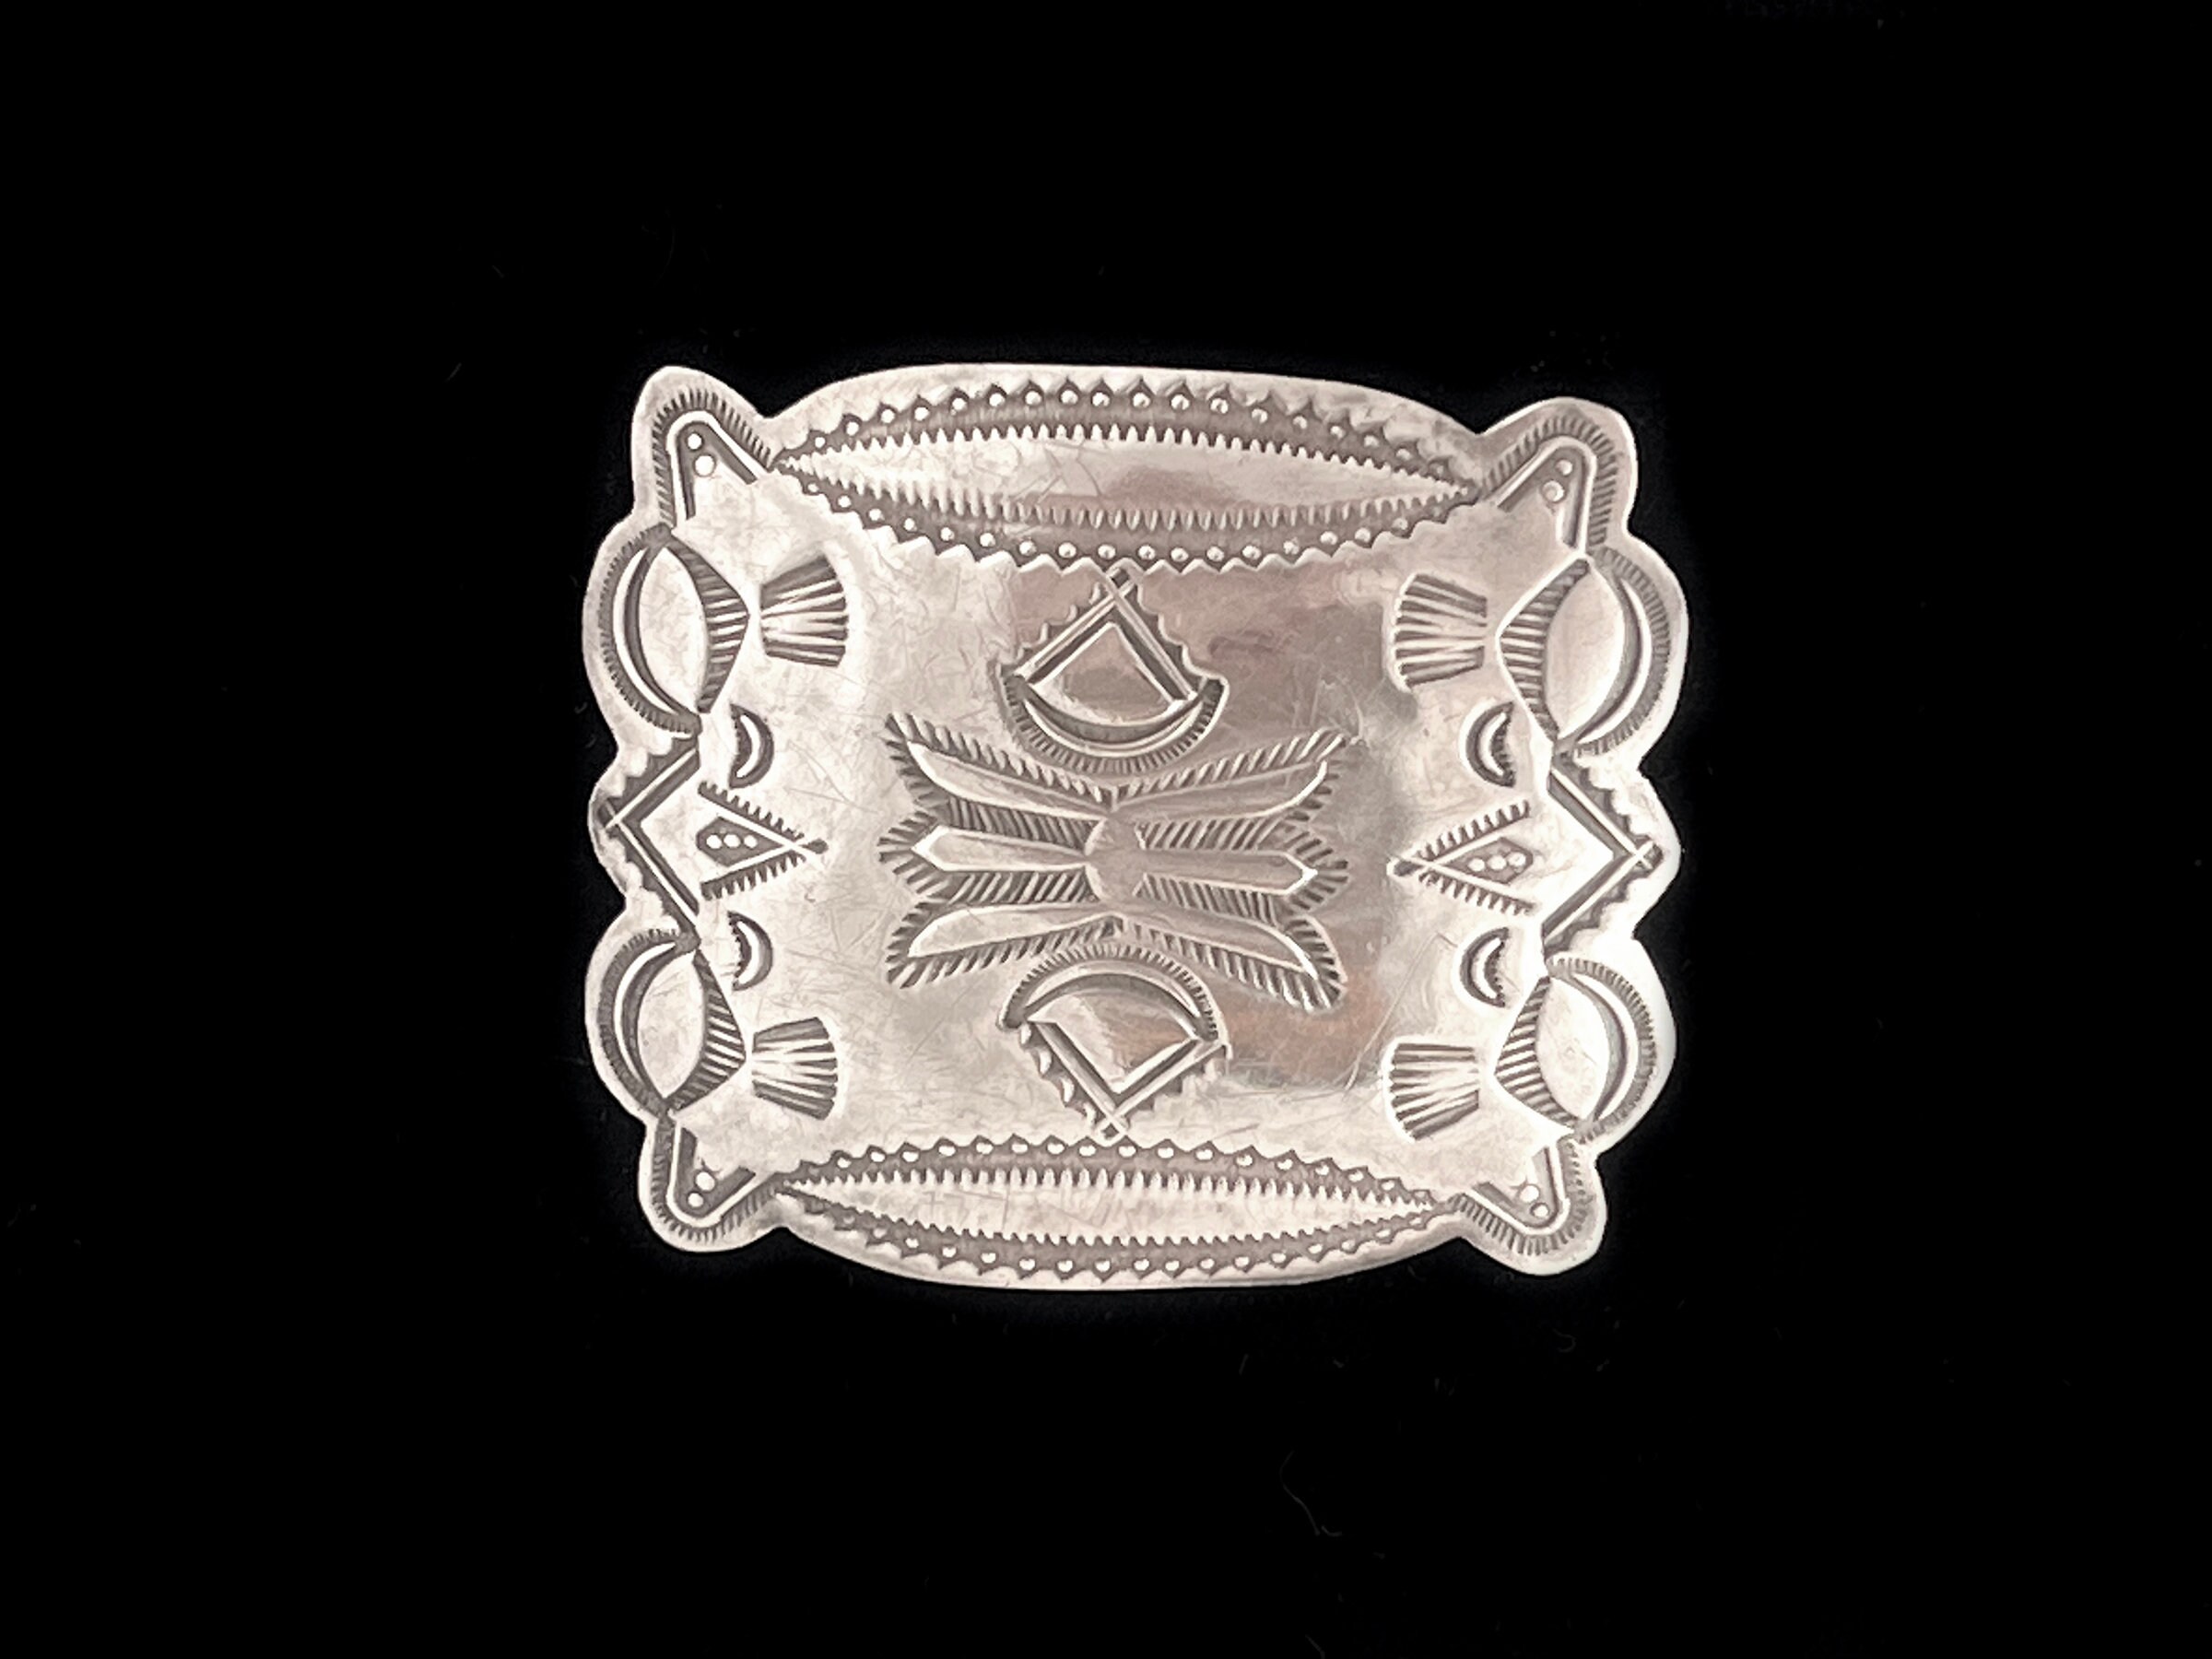 Navajo Small Vintage Belt Buckle Hand Stamped Concho Design - Etsy